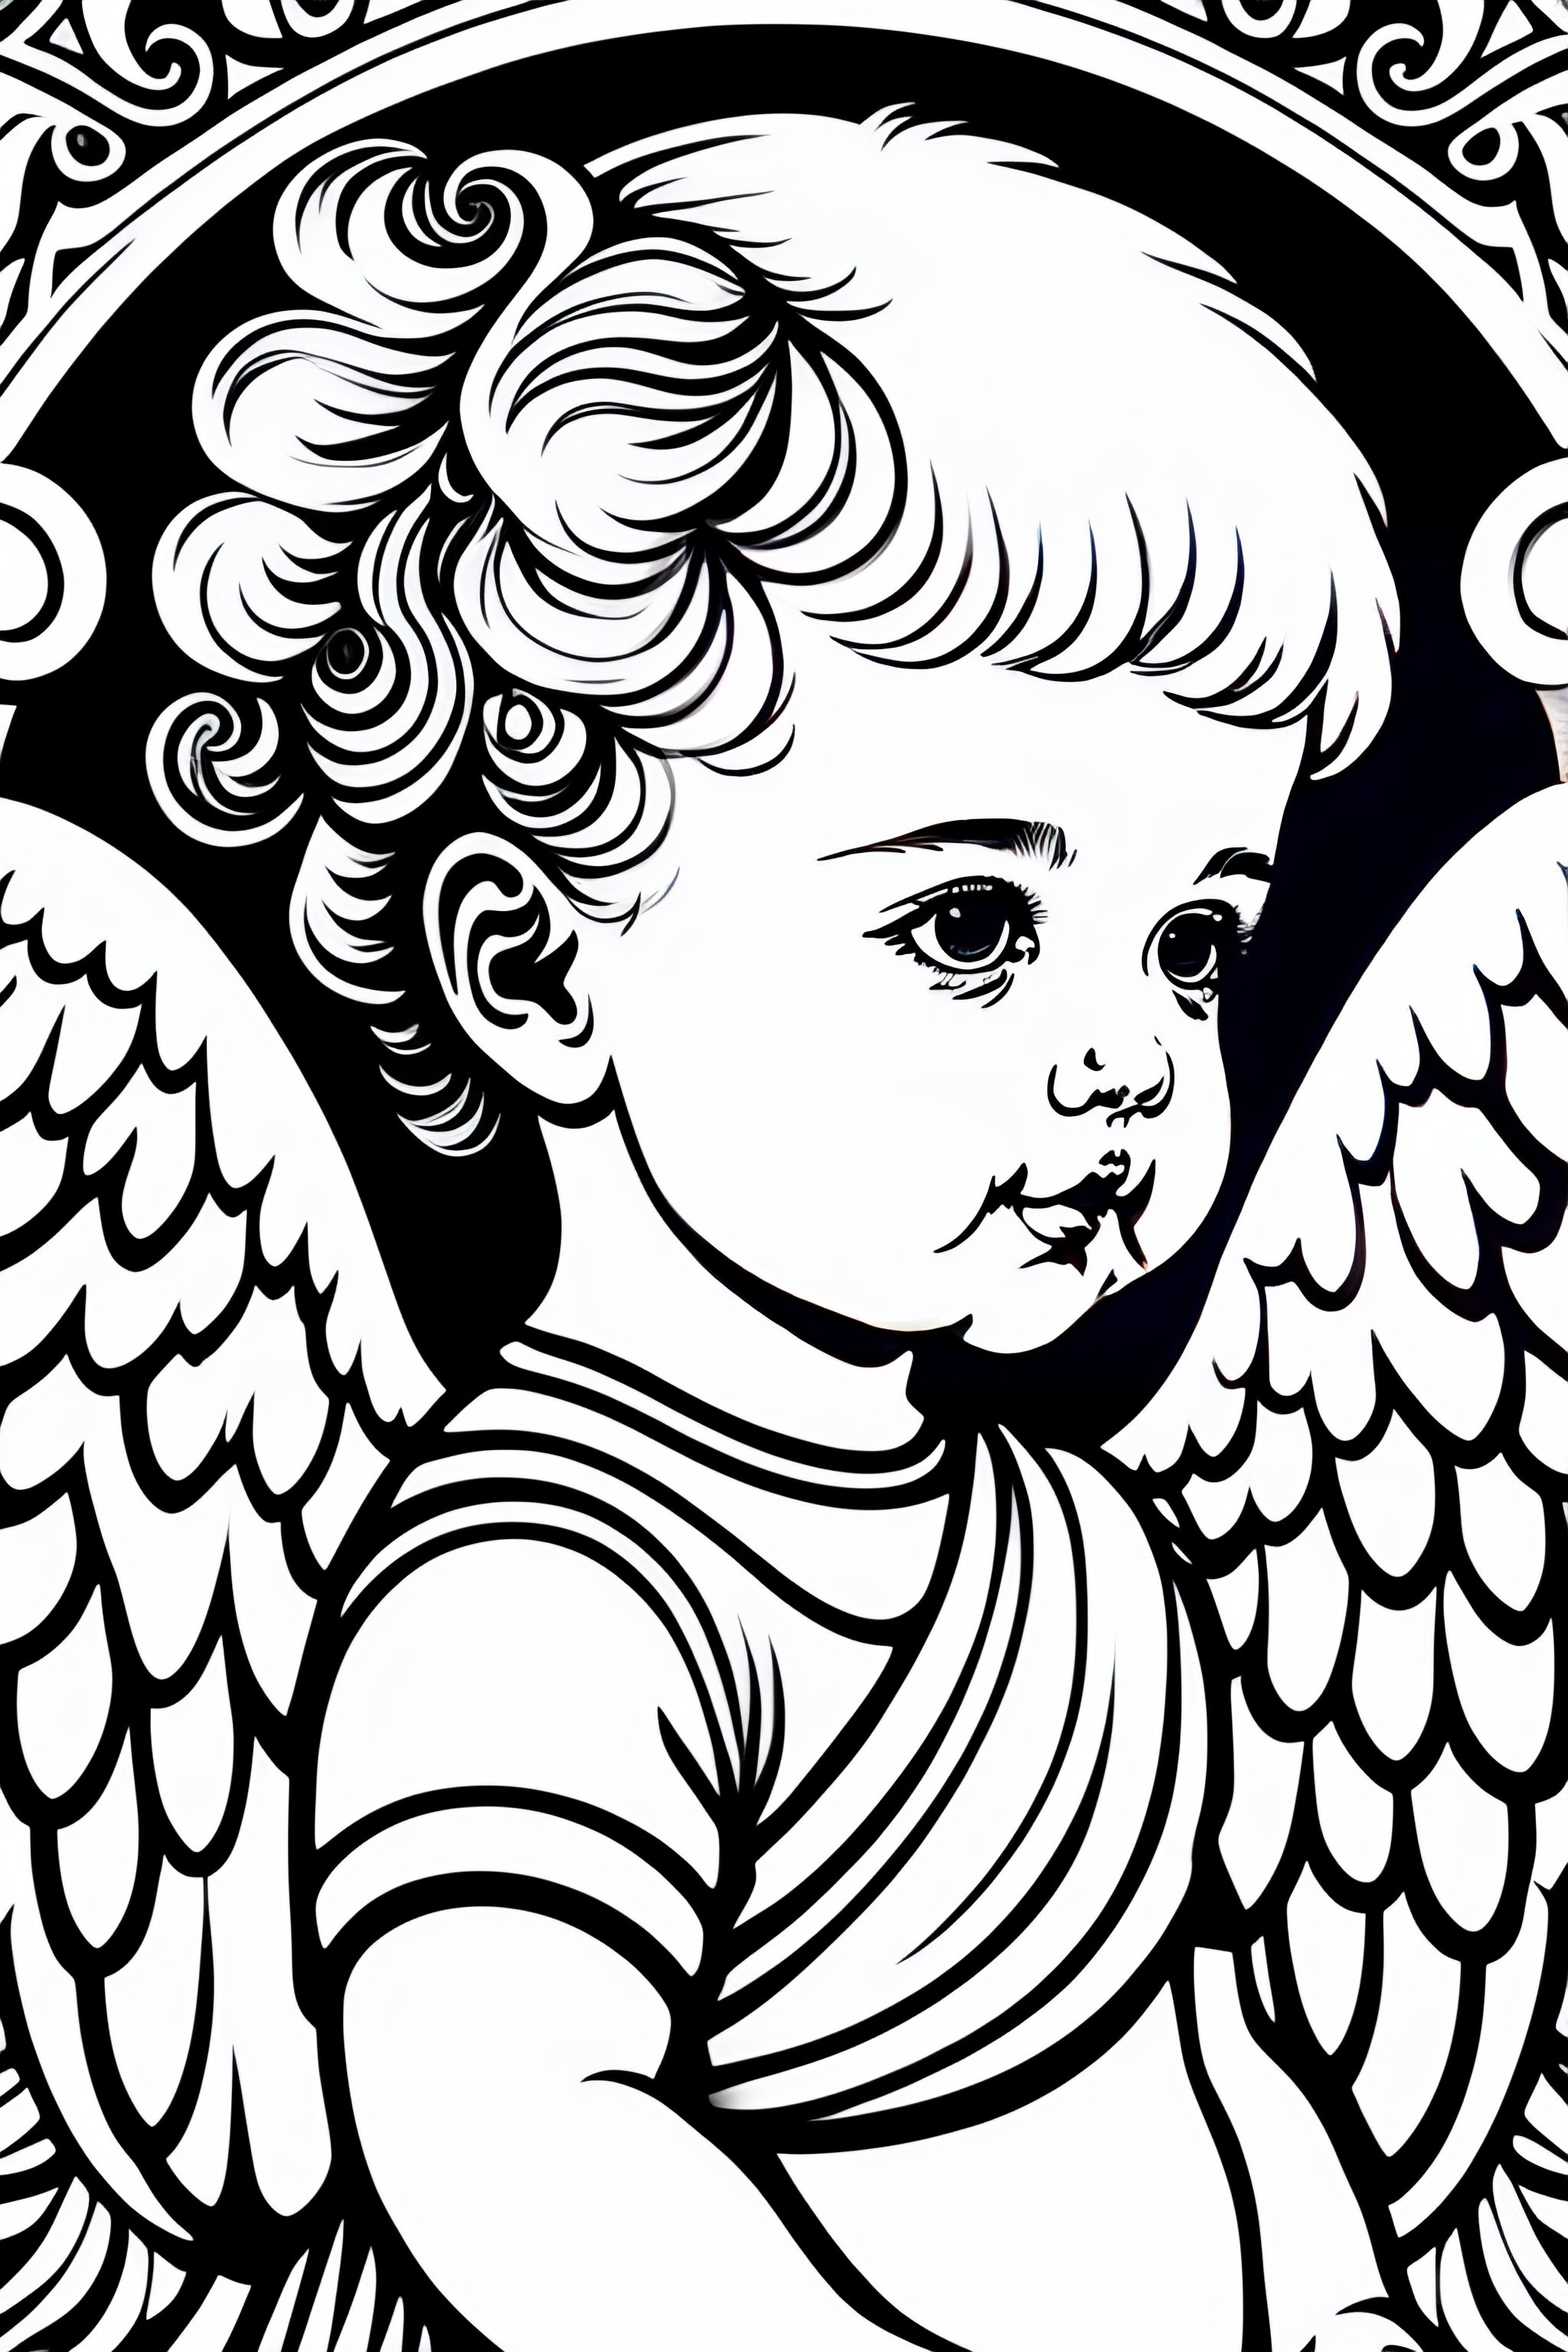 baby angel clipart black and white